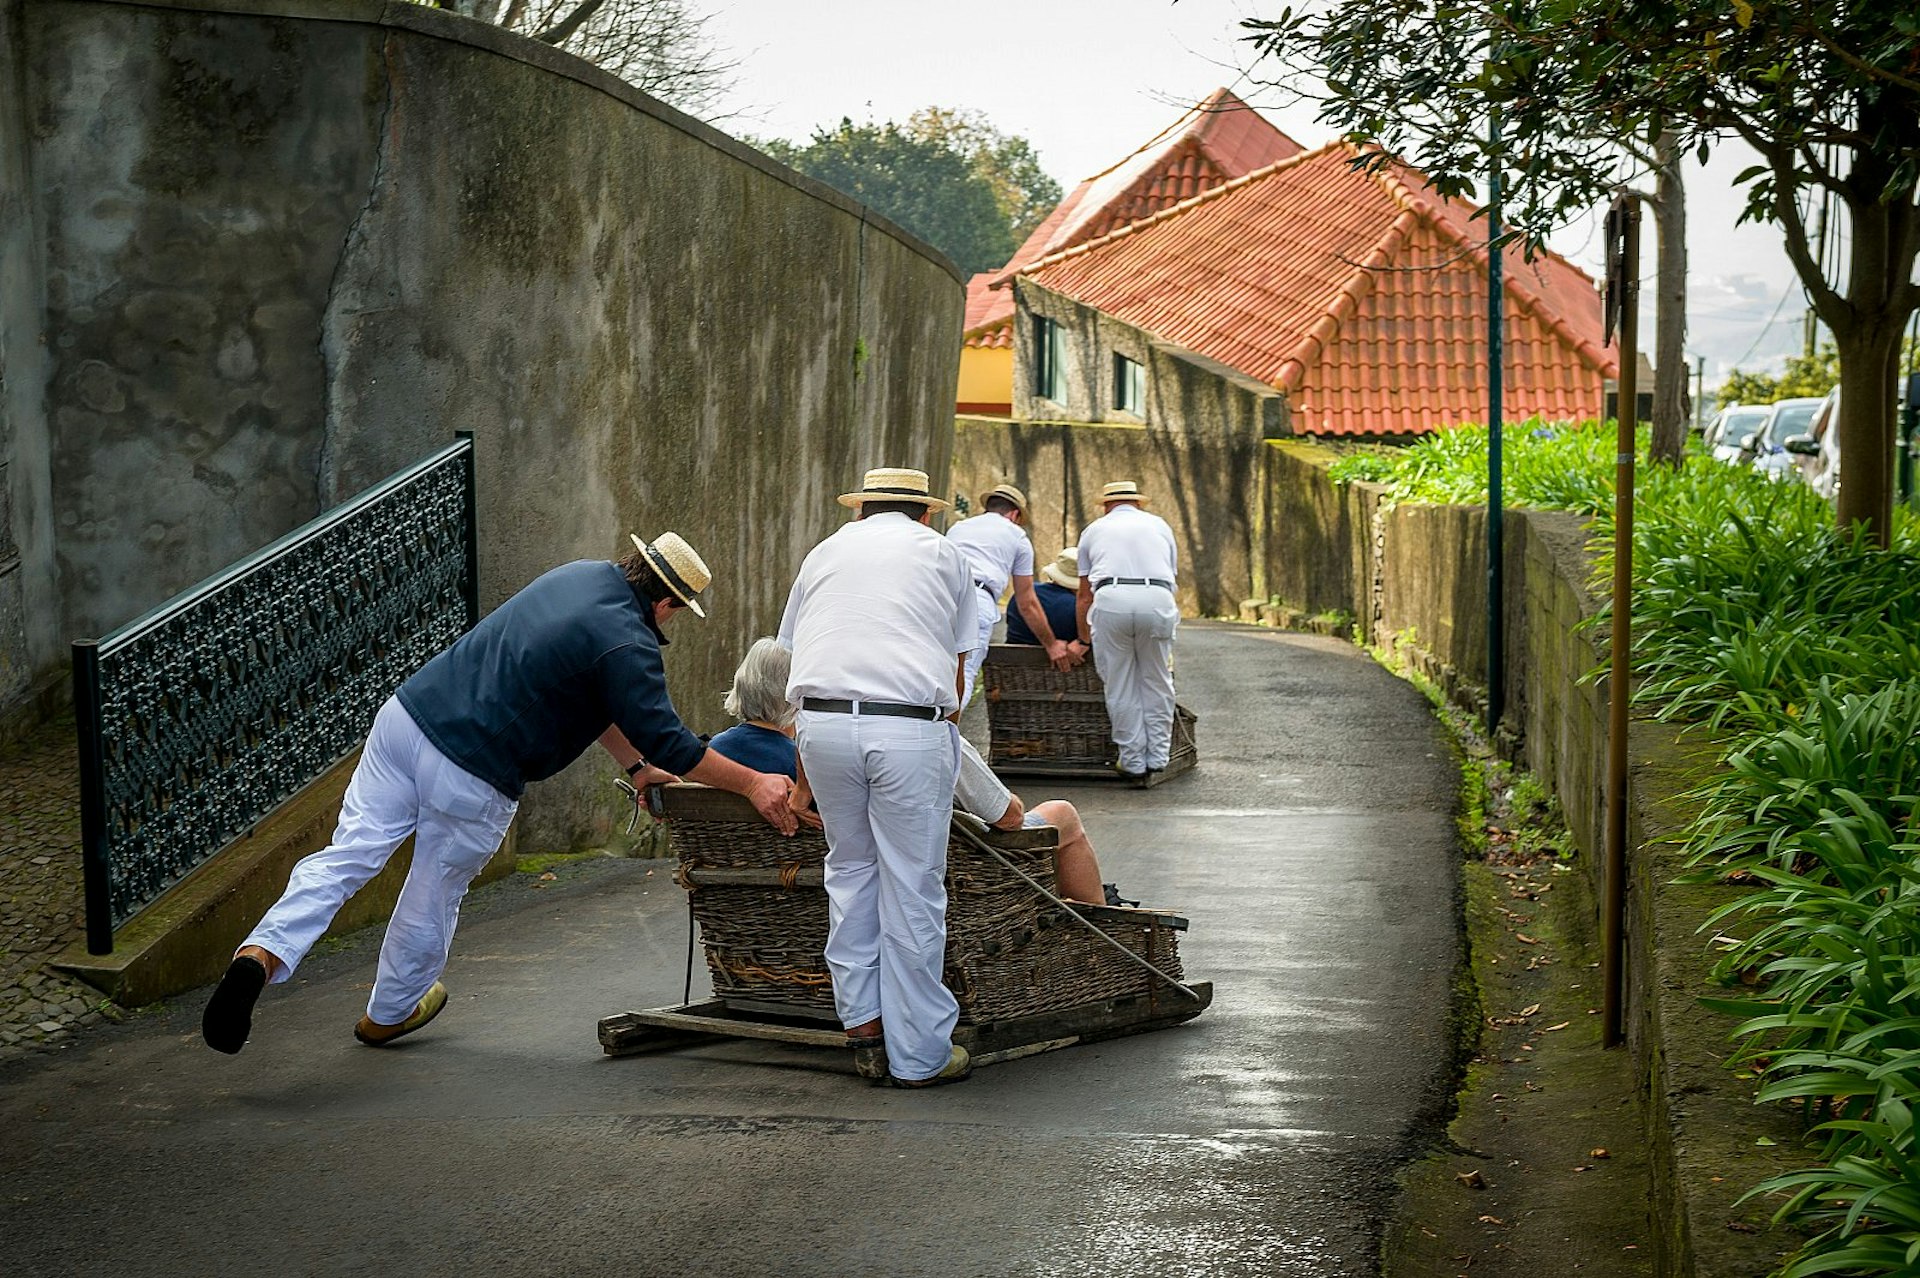 Men in white trousers and boater hats drive passengers in traditional wicker sledges downhill on the streets of Funchal.; it's one of the most fun things to do in Madeira.